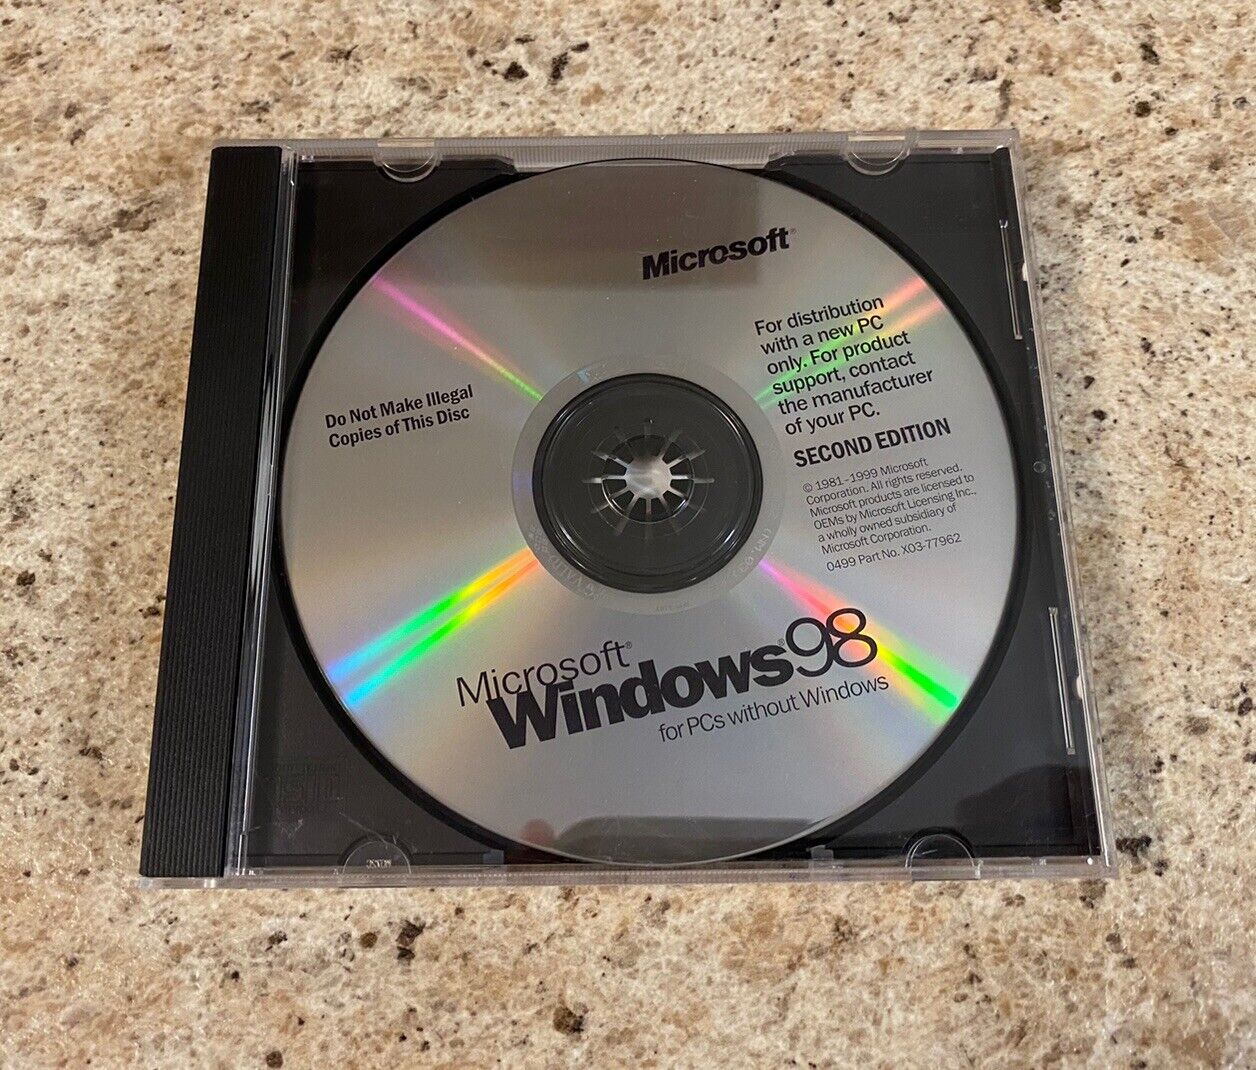 Microsoft Windows 98 Second Edition Disc For PCs Without Windows Rare Computer